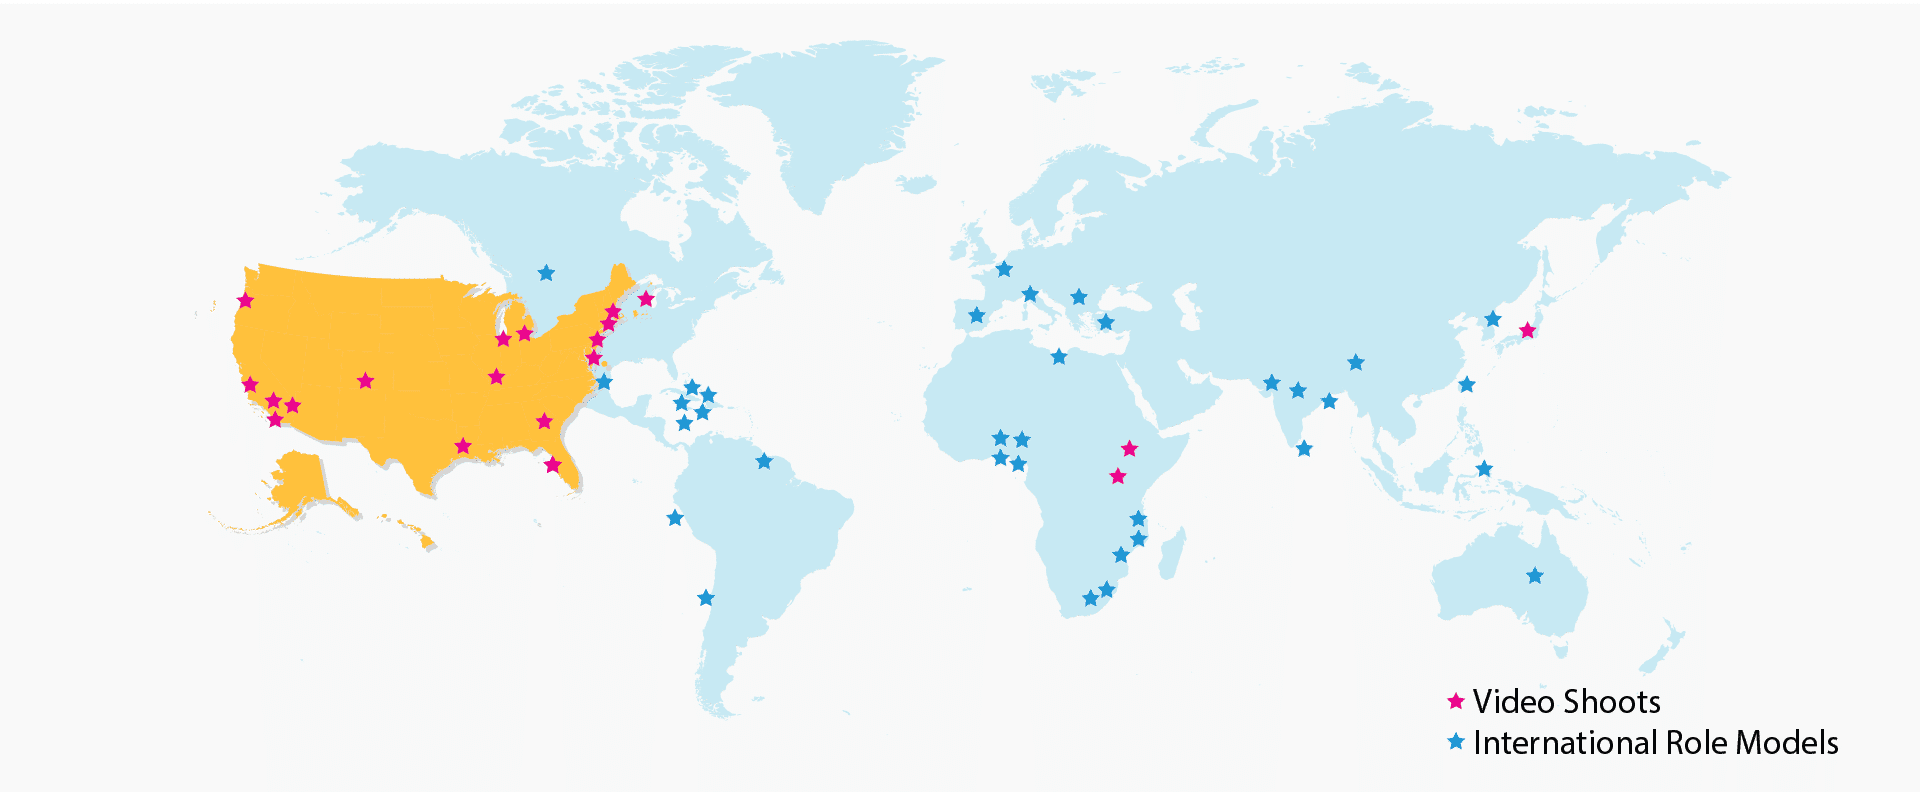 World map of Career Girls video shoots and role model locations